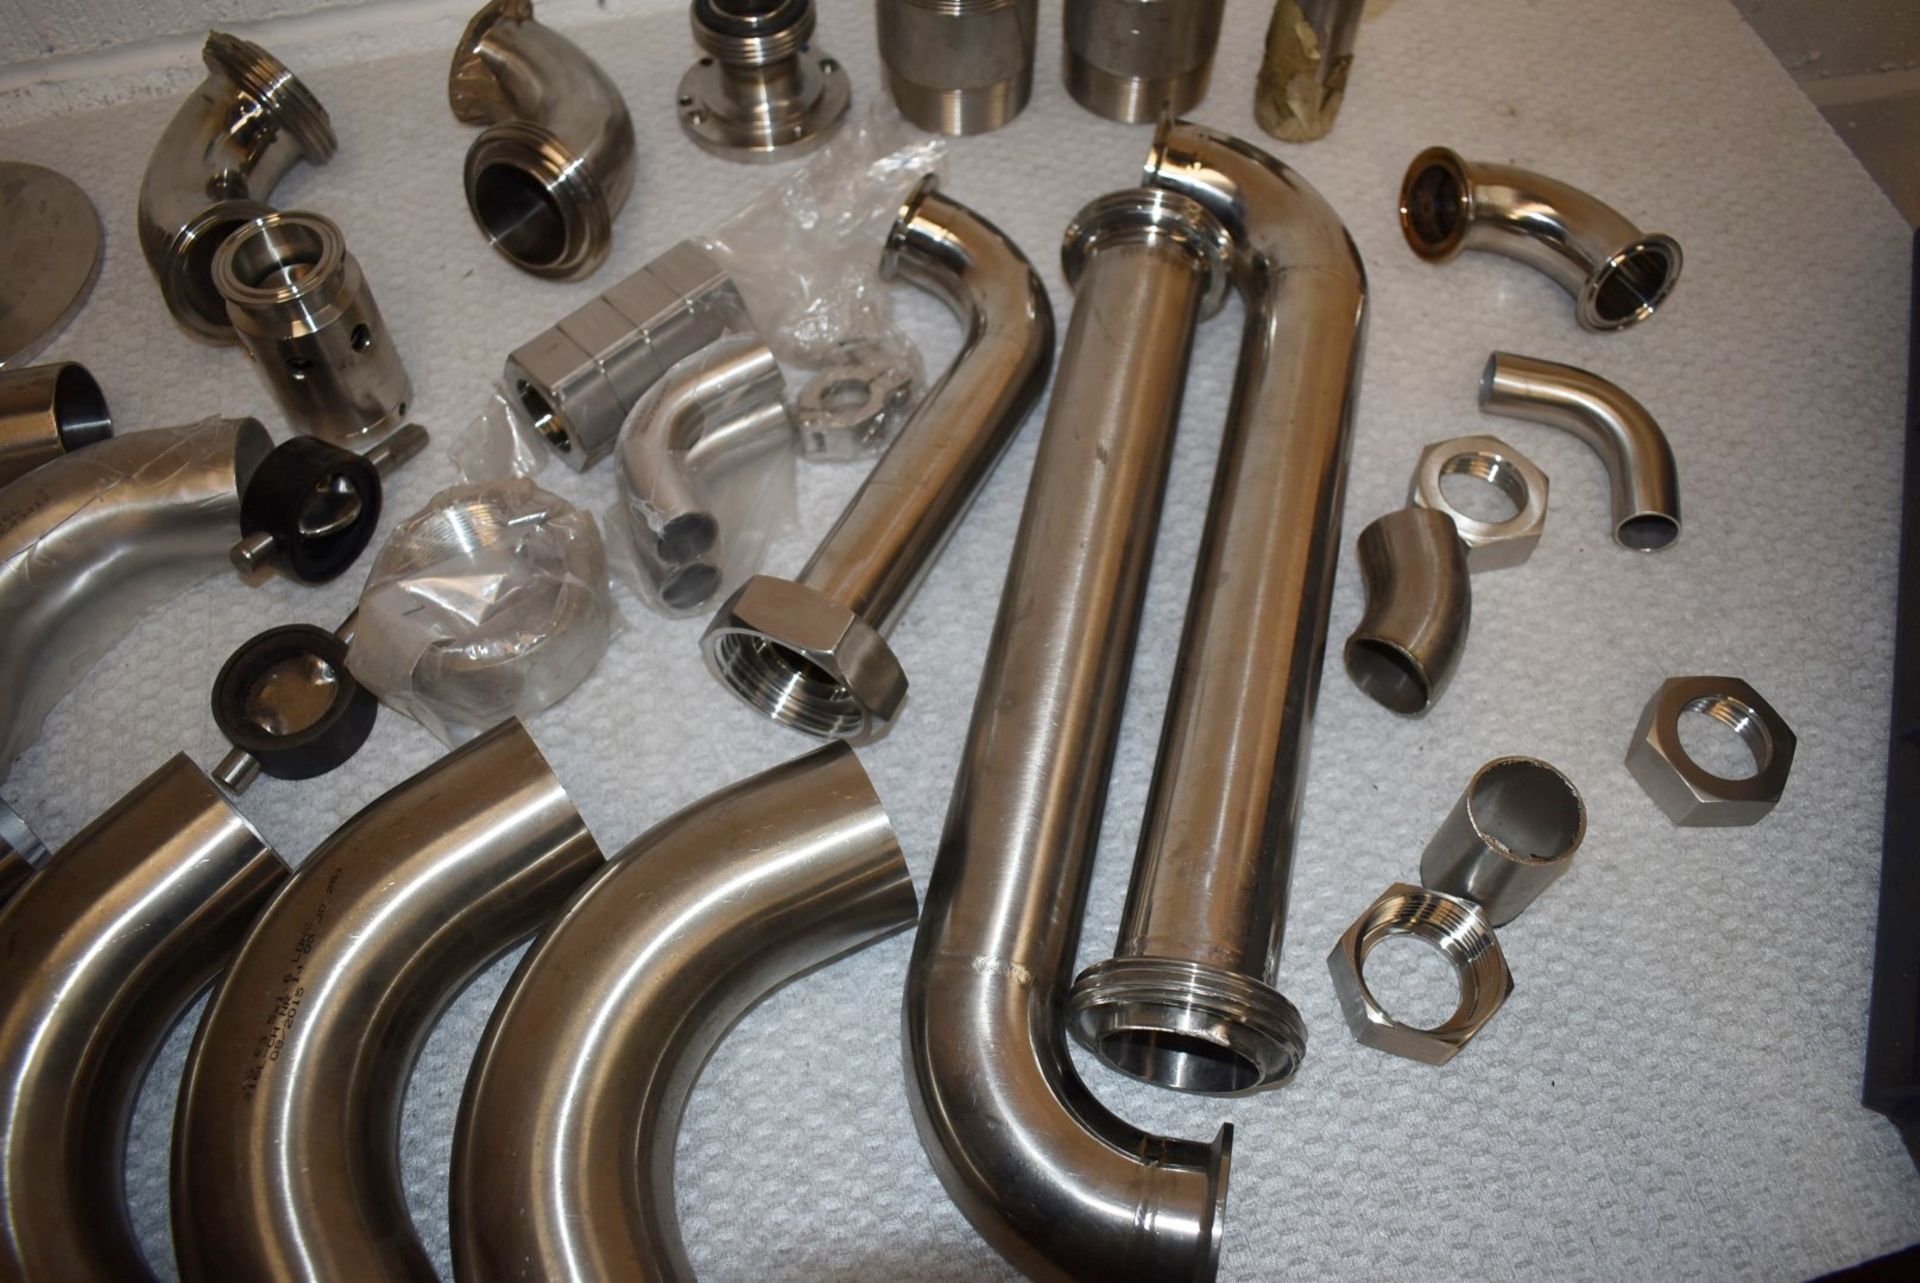 Assorted Job Lot of Stainless Steel Fittings For Brewery Equipment - Includes Approx 38 Pieces - - Image 13 of 13